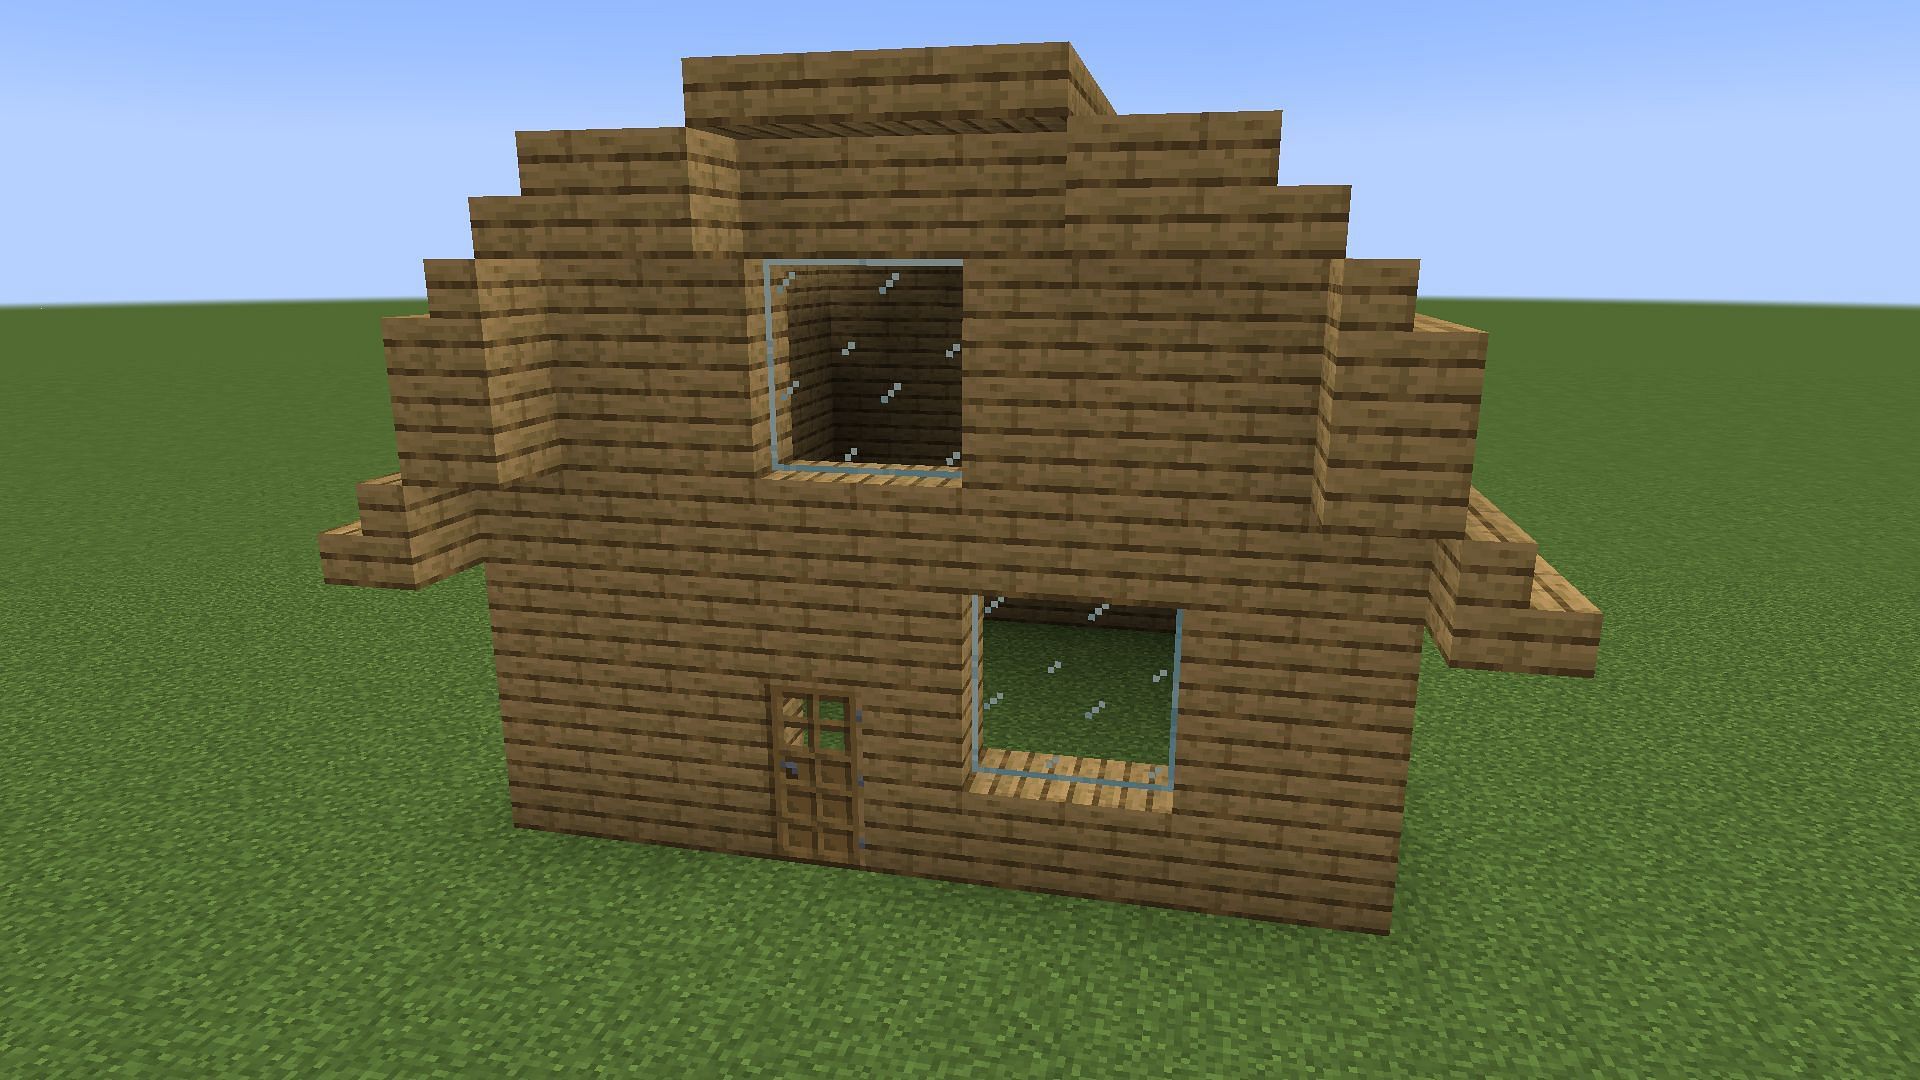 Curved wooden roof (Image via Mojang)